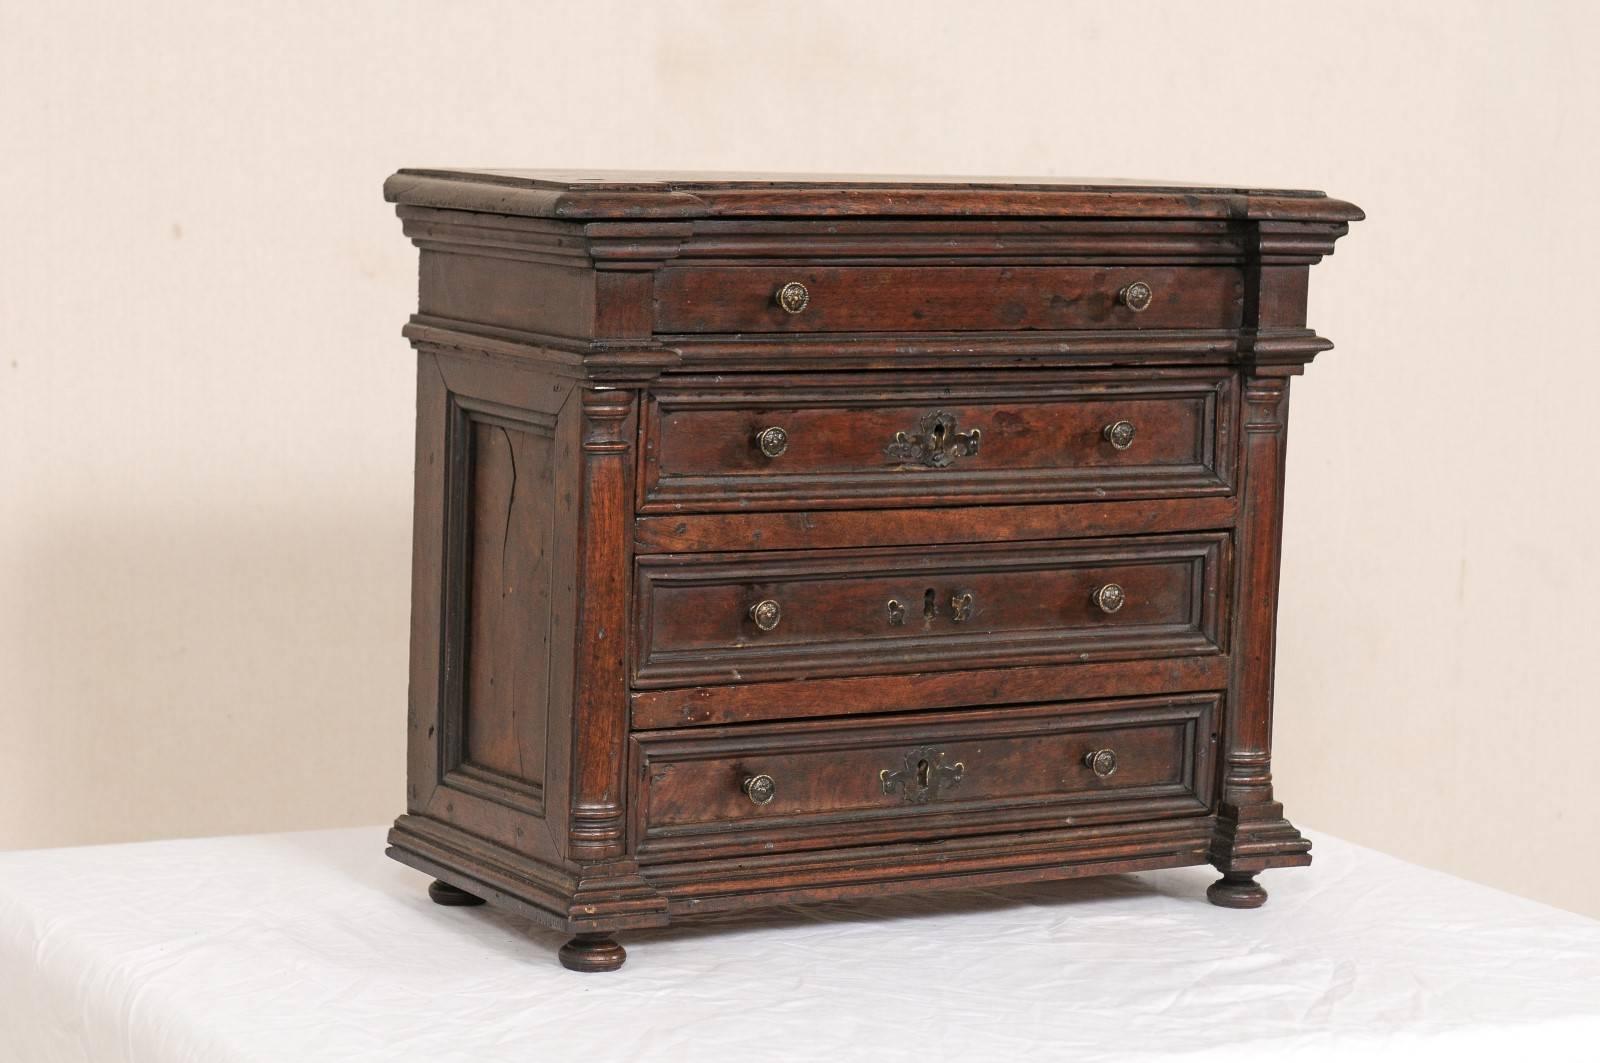 Italian Early 18th Century Petite-Sized Walnut Chest w/Drawers for Table-Top  In Good Condition For Sale In Atlanta, GA